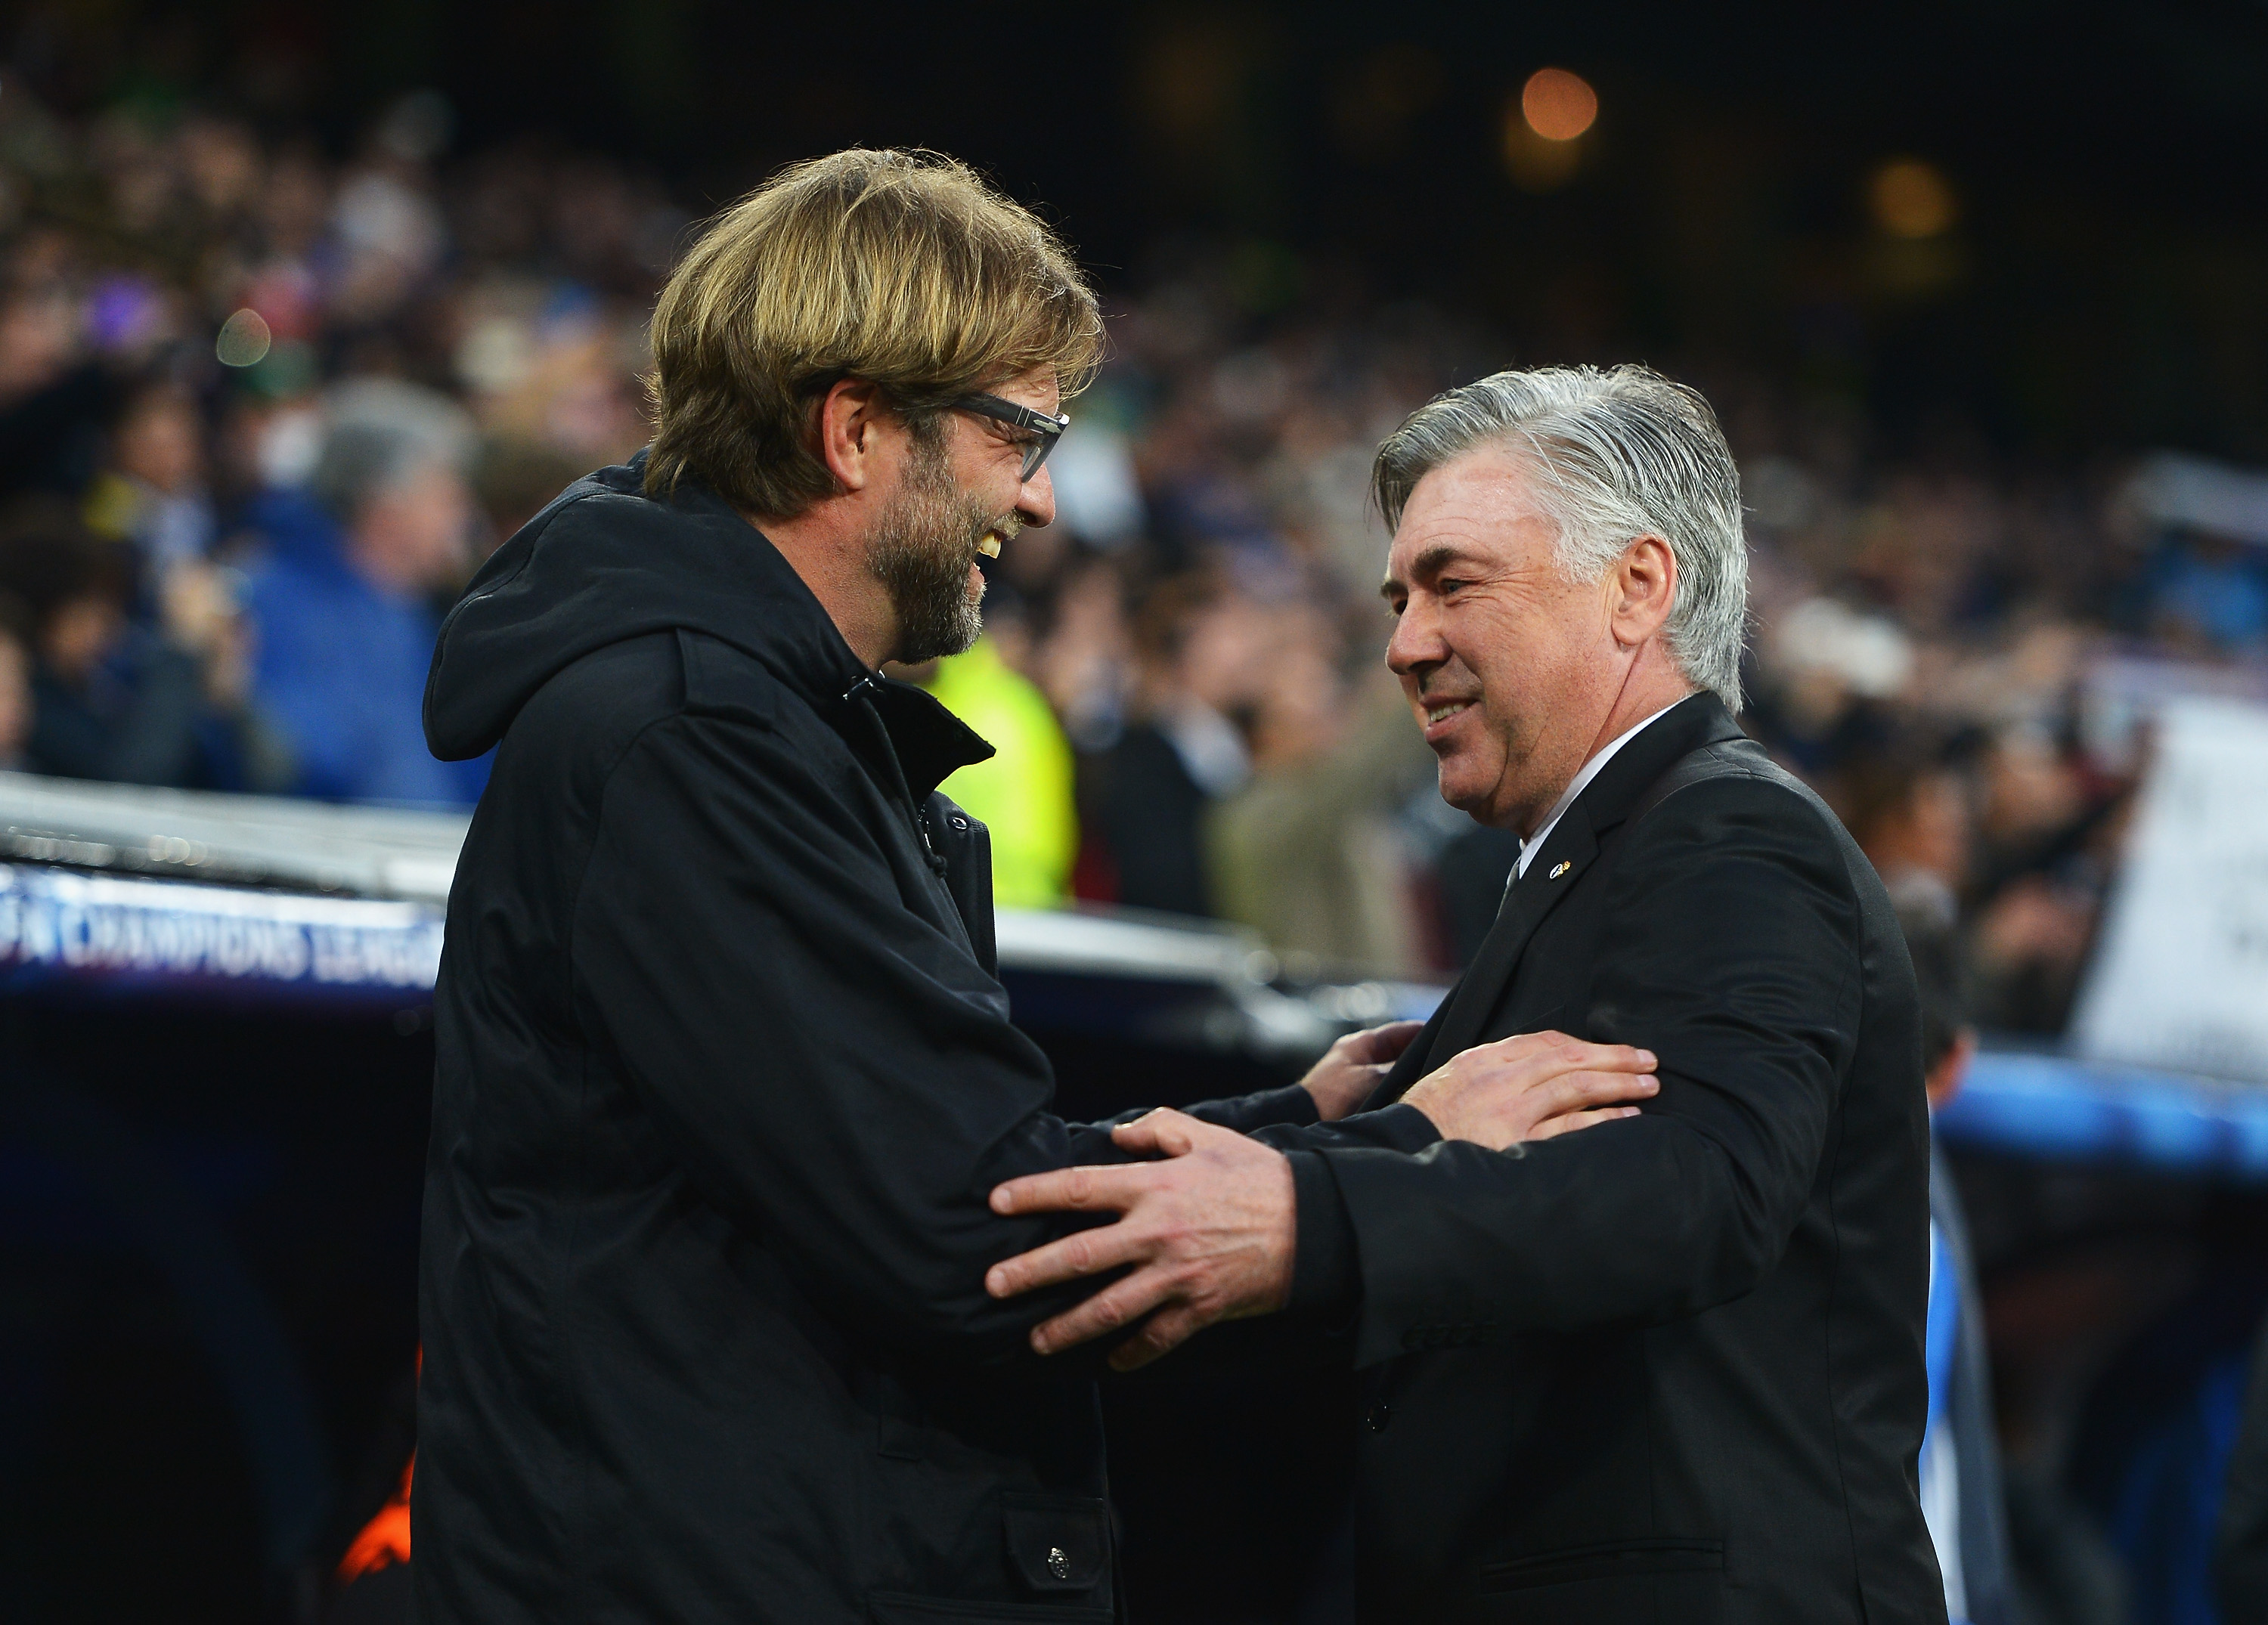 MADRID, SPAIN - APRIL 02:  Juergen Klopp (L), coach of Borussia Dortmund is greeted by Carlo Ancelotti, coach of Real Madrid during the UEFA Champions League Quarter Final first leg match between Real Madrid and Borussia Dortmund at Estadio Santiago Bernabeu on April 2, 2014 in Madrid, Spain.  (Photo by Dennis Grombkowski/Bongarts/Getty Images)